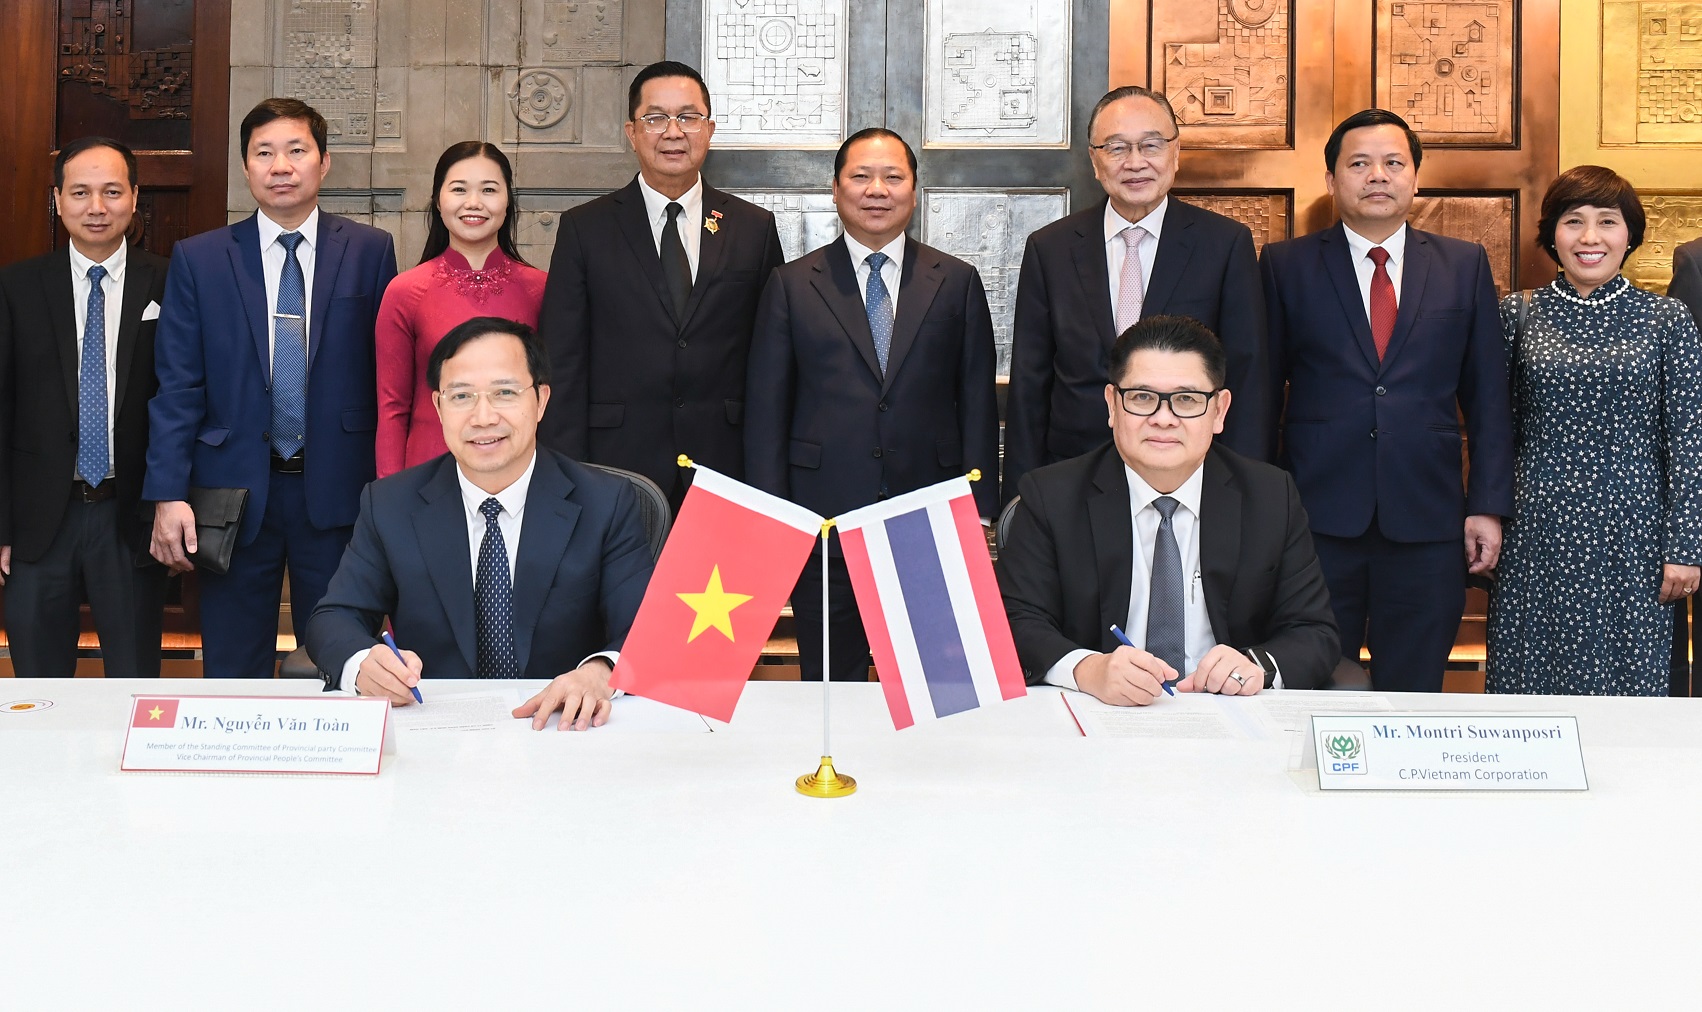 CP Vietnam and Hoa Binh Province Partner for Agricultural Enhancement and Economic Growth